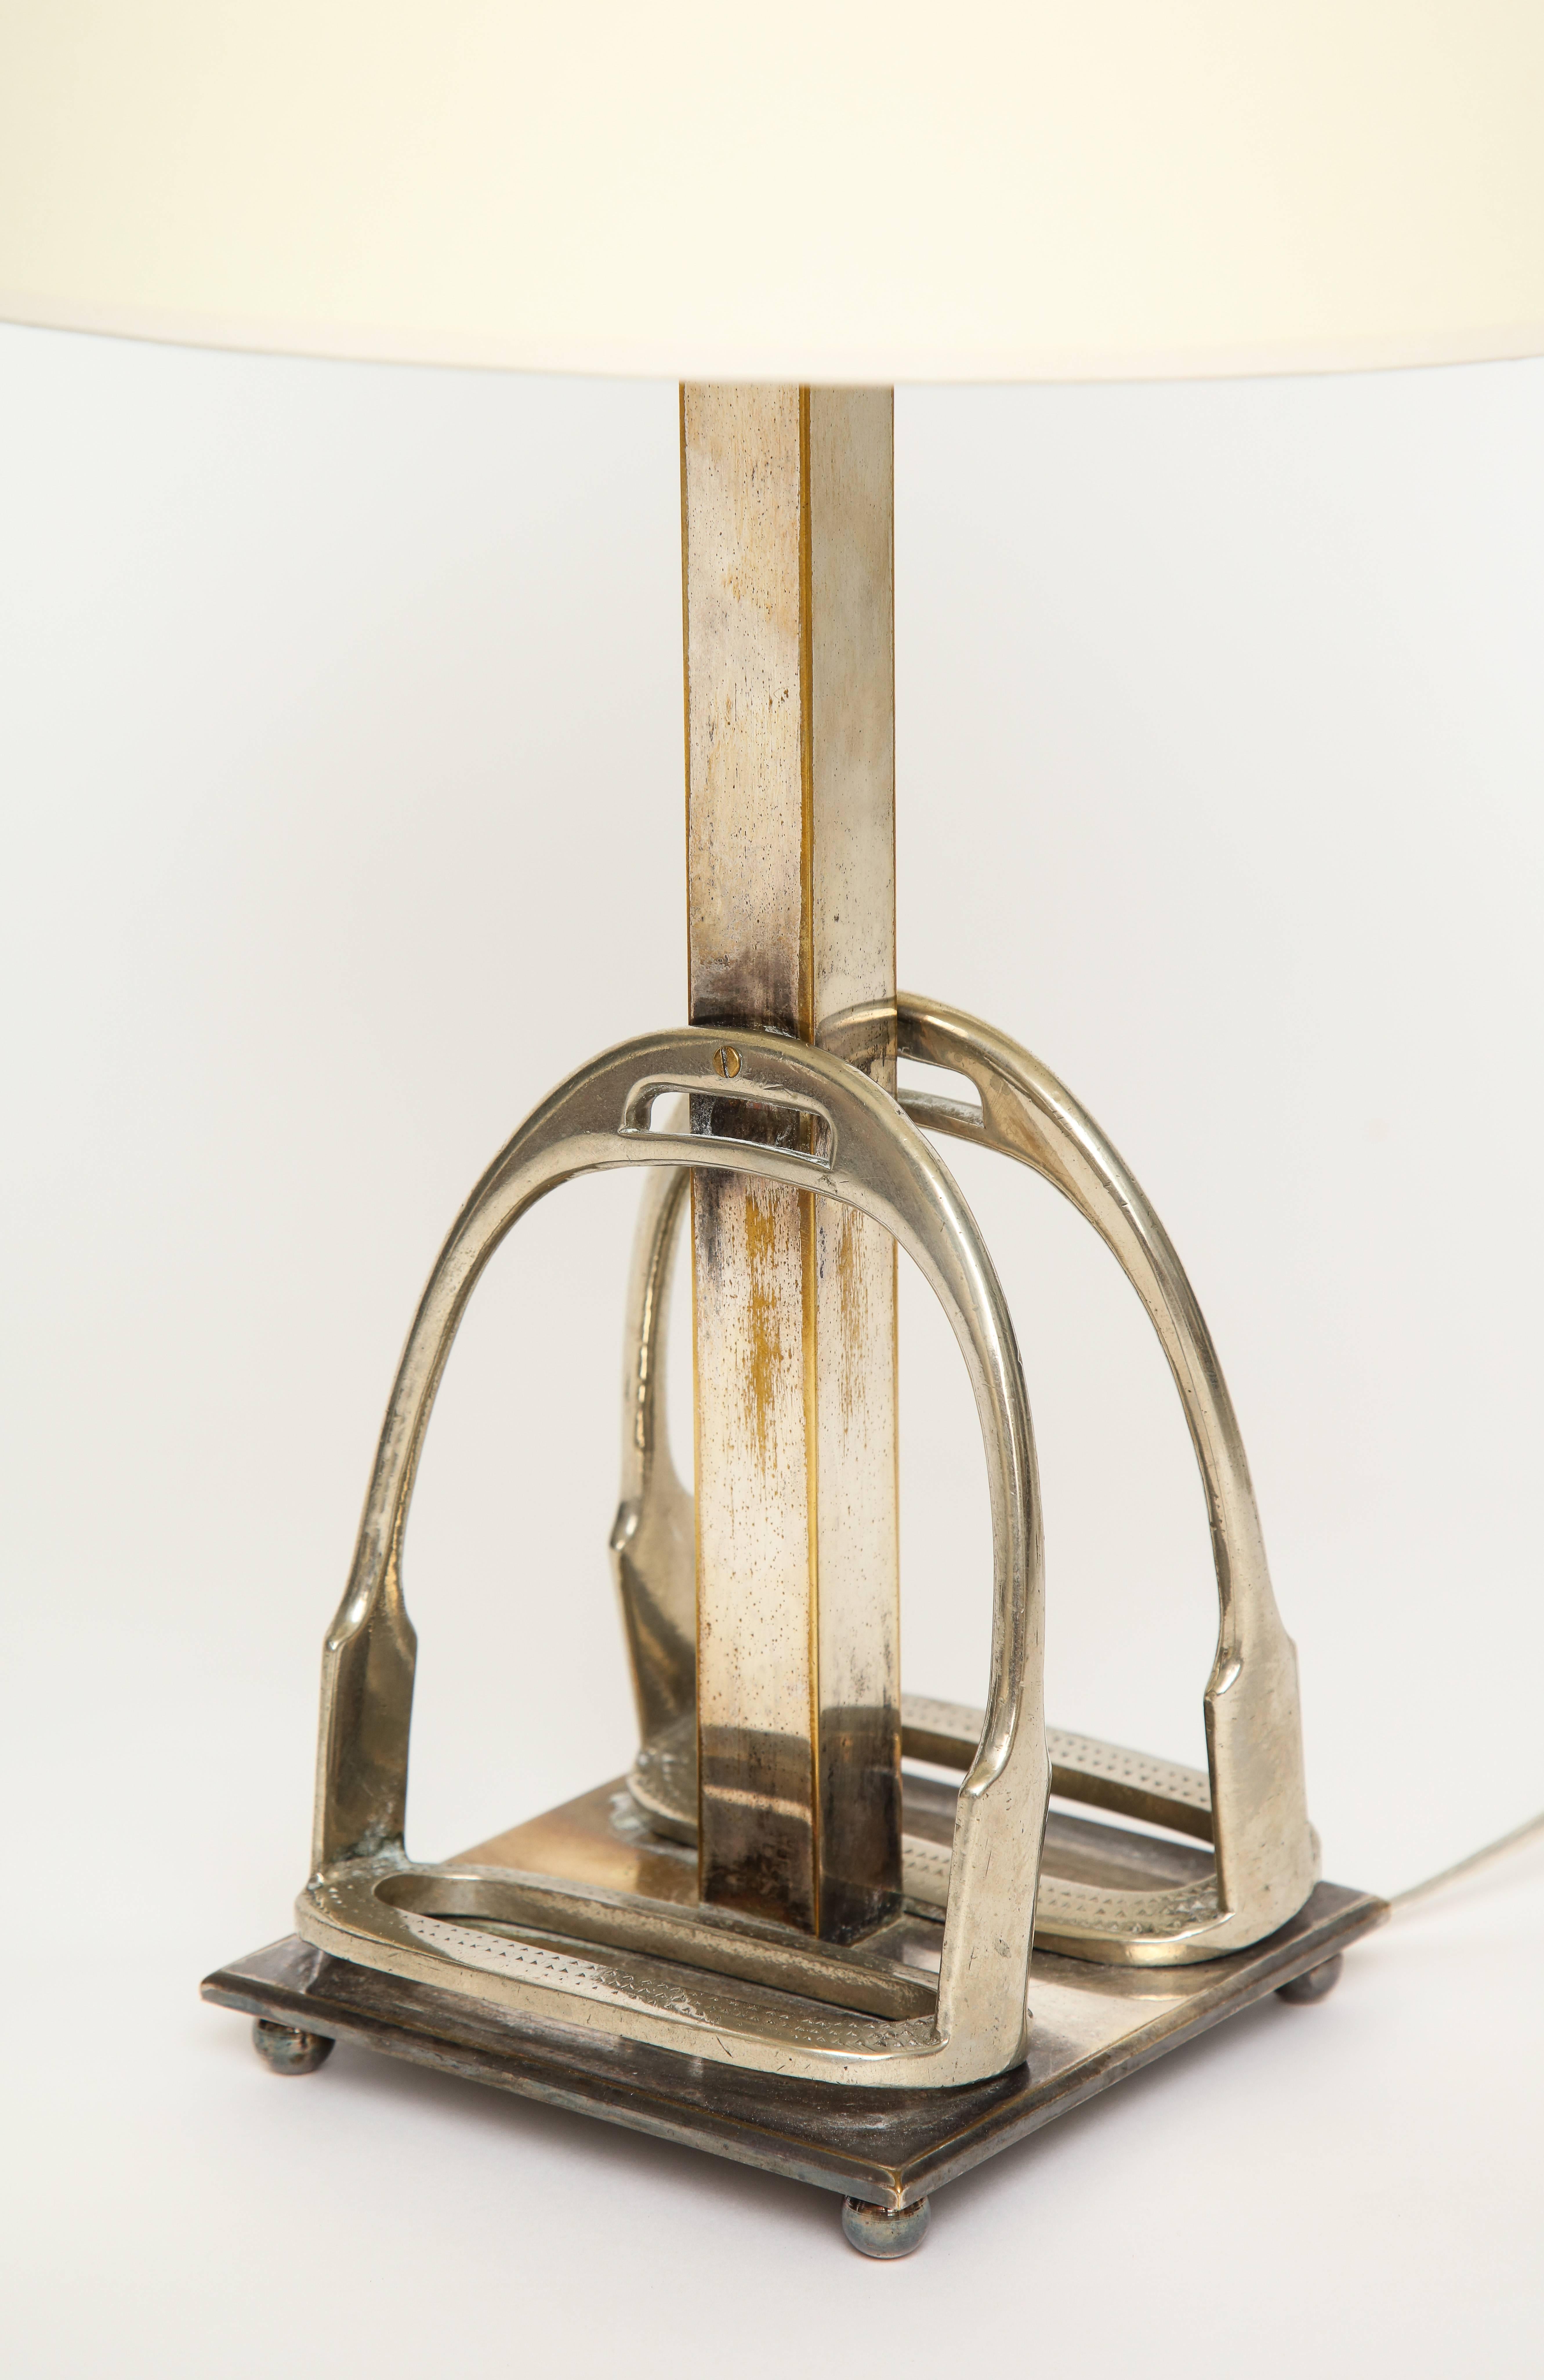 French Adnet Attributed Art Deco Nickel Desk Table Lamp, France, 1930s For Sale